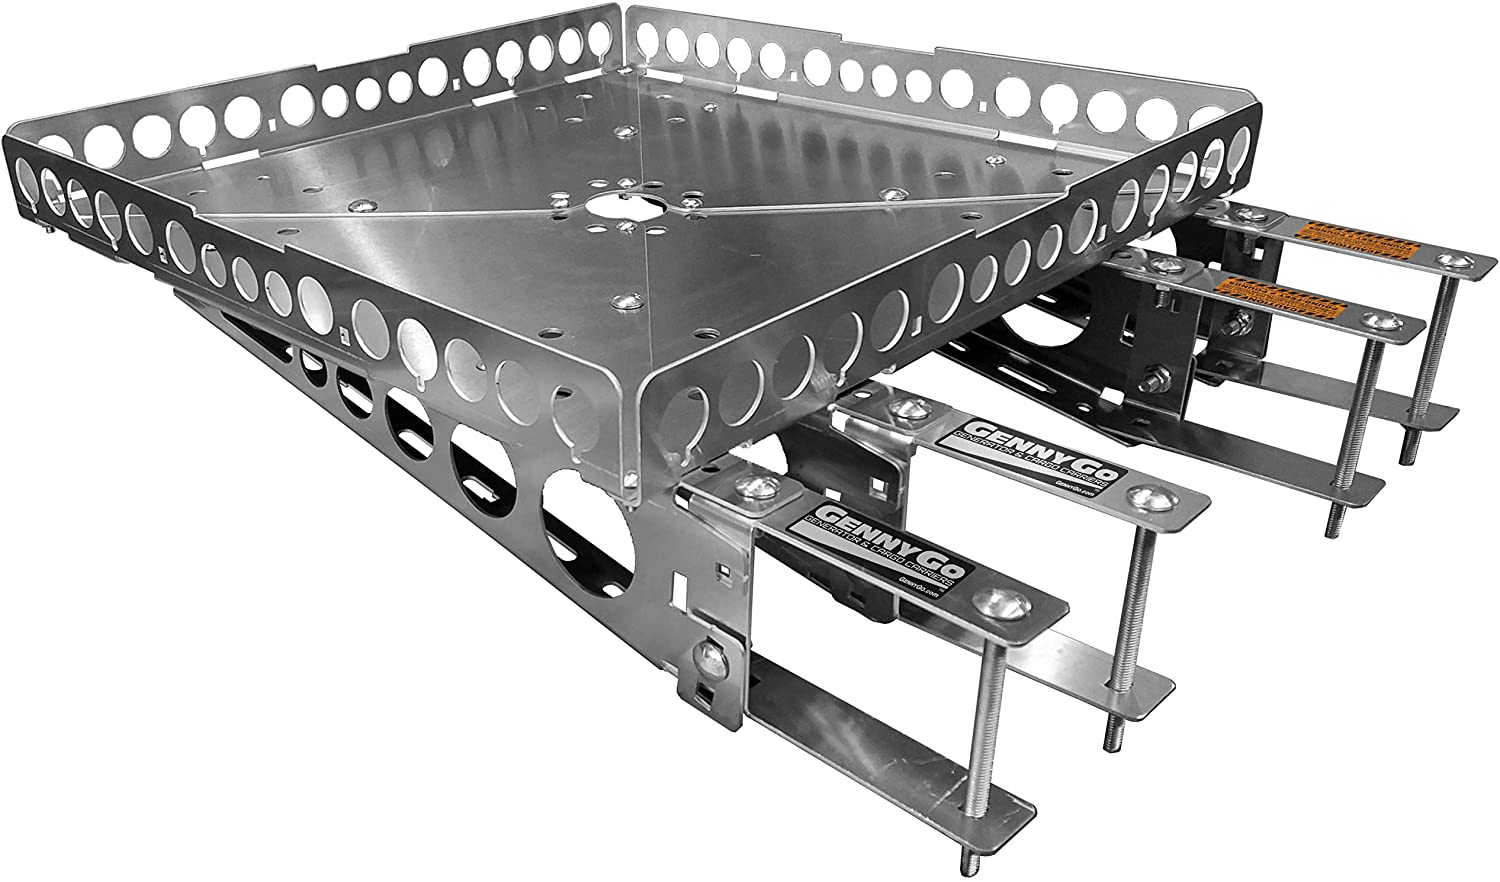 Mount-n-Lock GennyGo RevX RV Bumper-Mounted Cargo Box and Tray Supports (Steel)